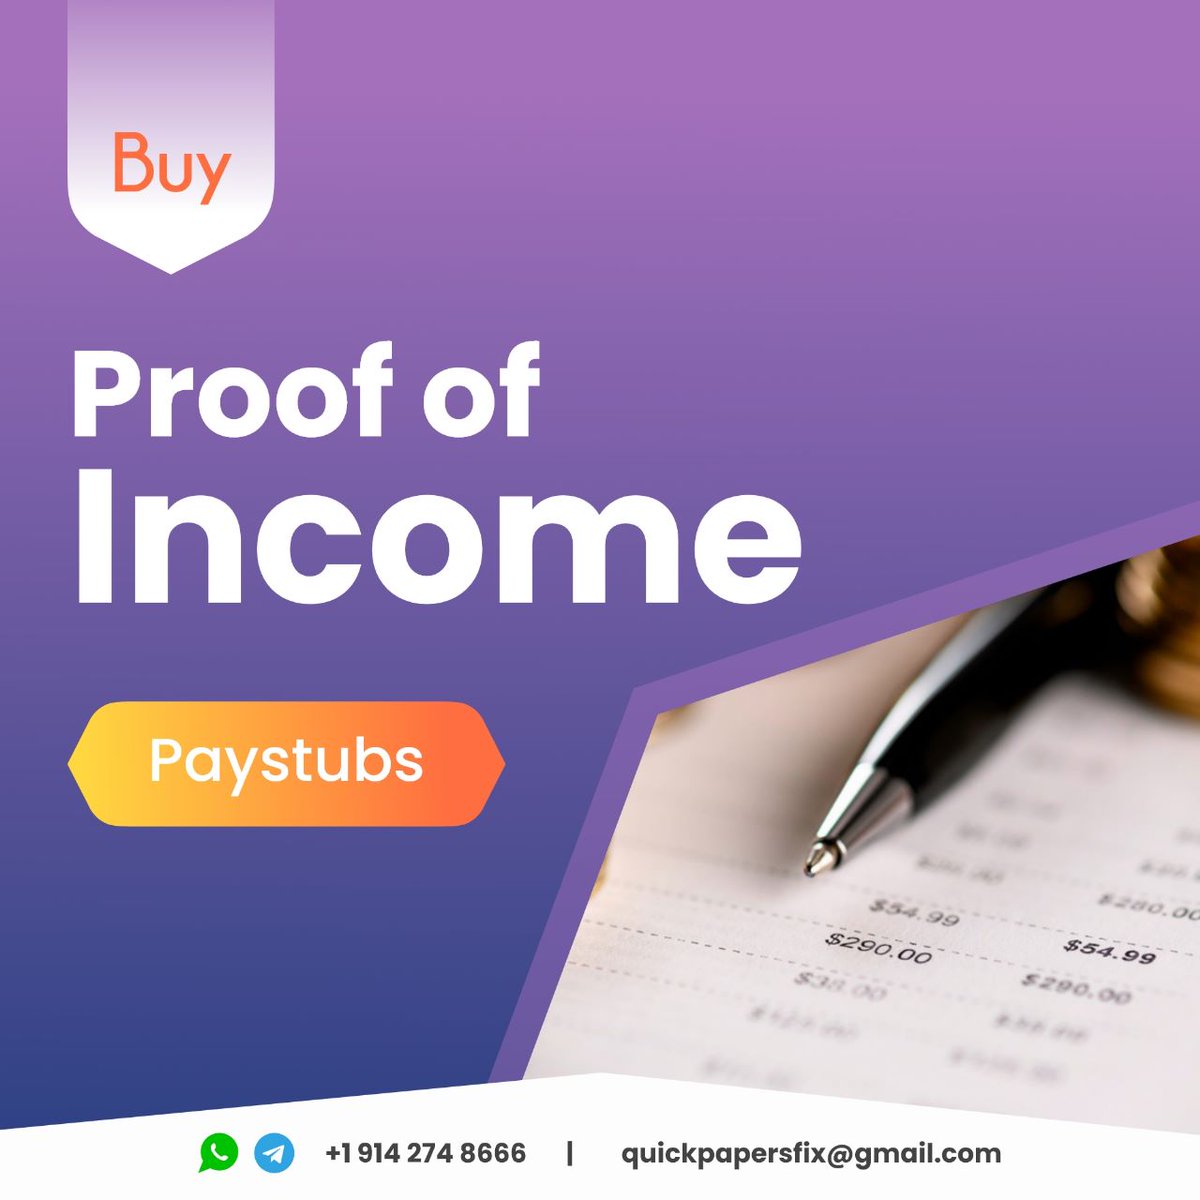 Proof of Income PayStubs

Contact Us:
wa.me/message/QTOEJJ…

#paystubs #paystubservice #paystubservices #checkstubs #checkstubservice #proofofincome #creditrepair #creditrepairservices #noveltydocuments #creditcardstatement #bankstatement
#paystubs #checkstubs